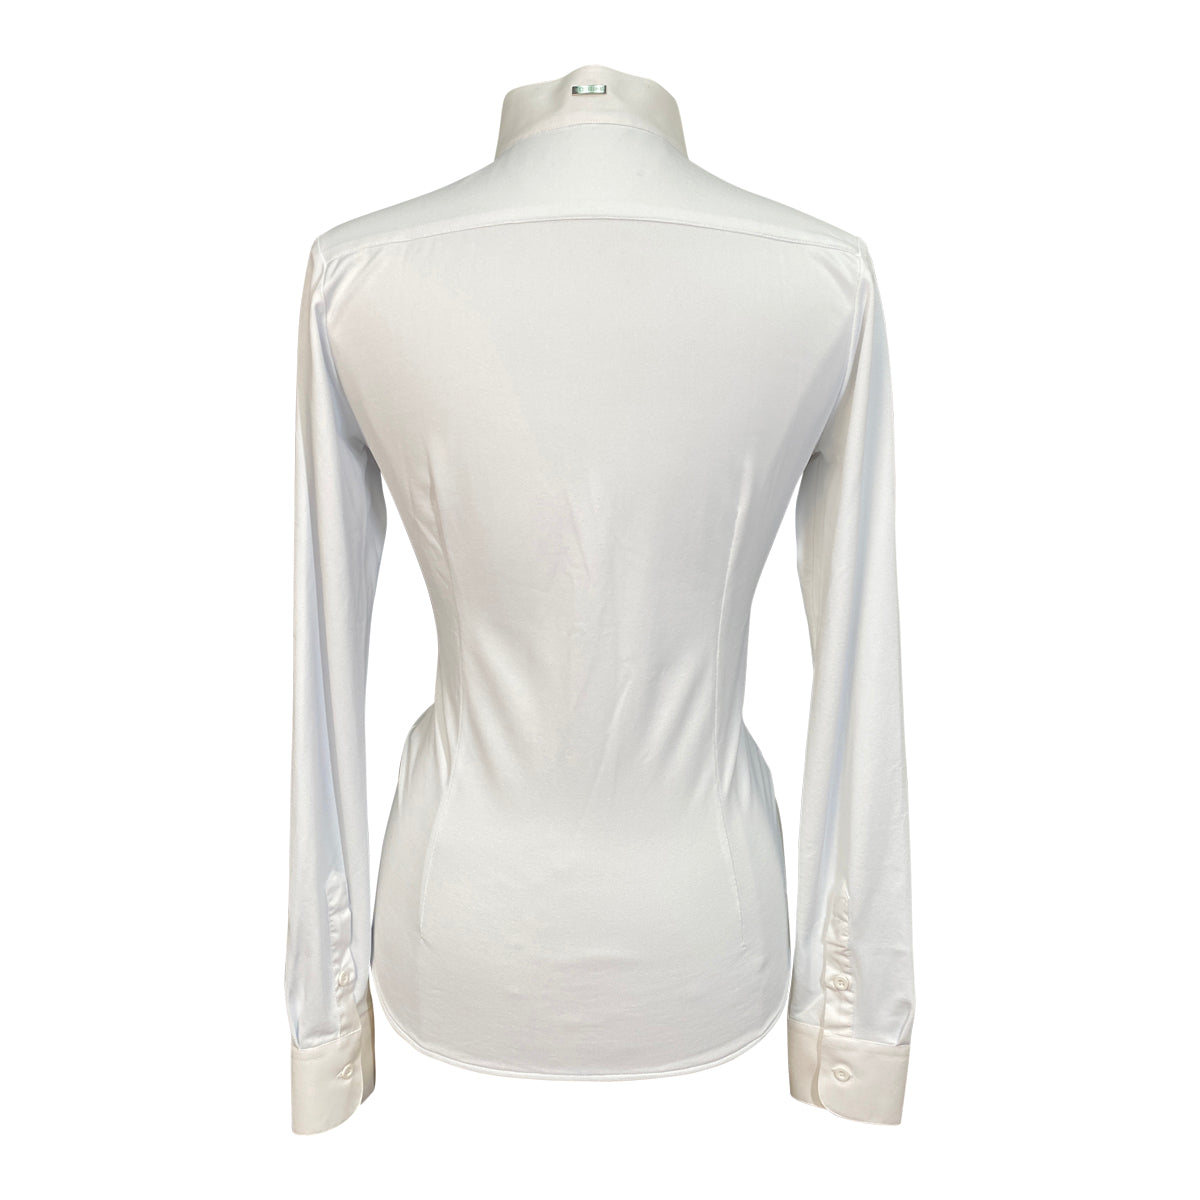 Equiline 'Victoria' Long Sleeve Show Shirt in White